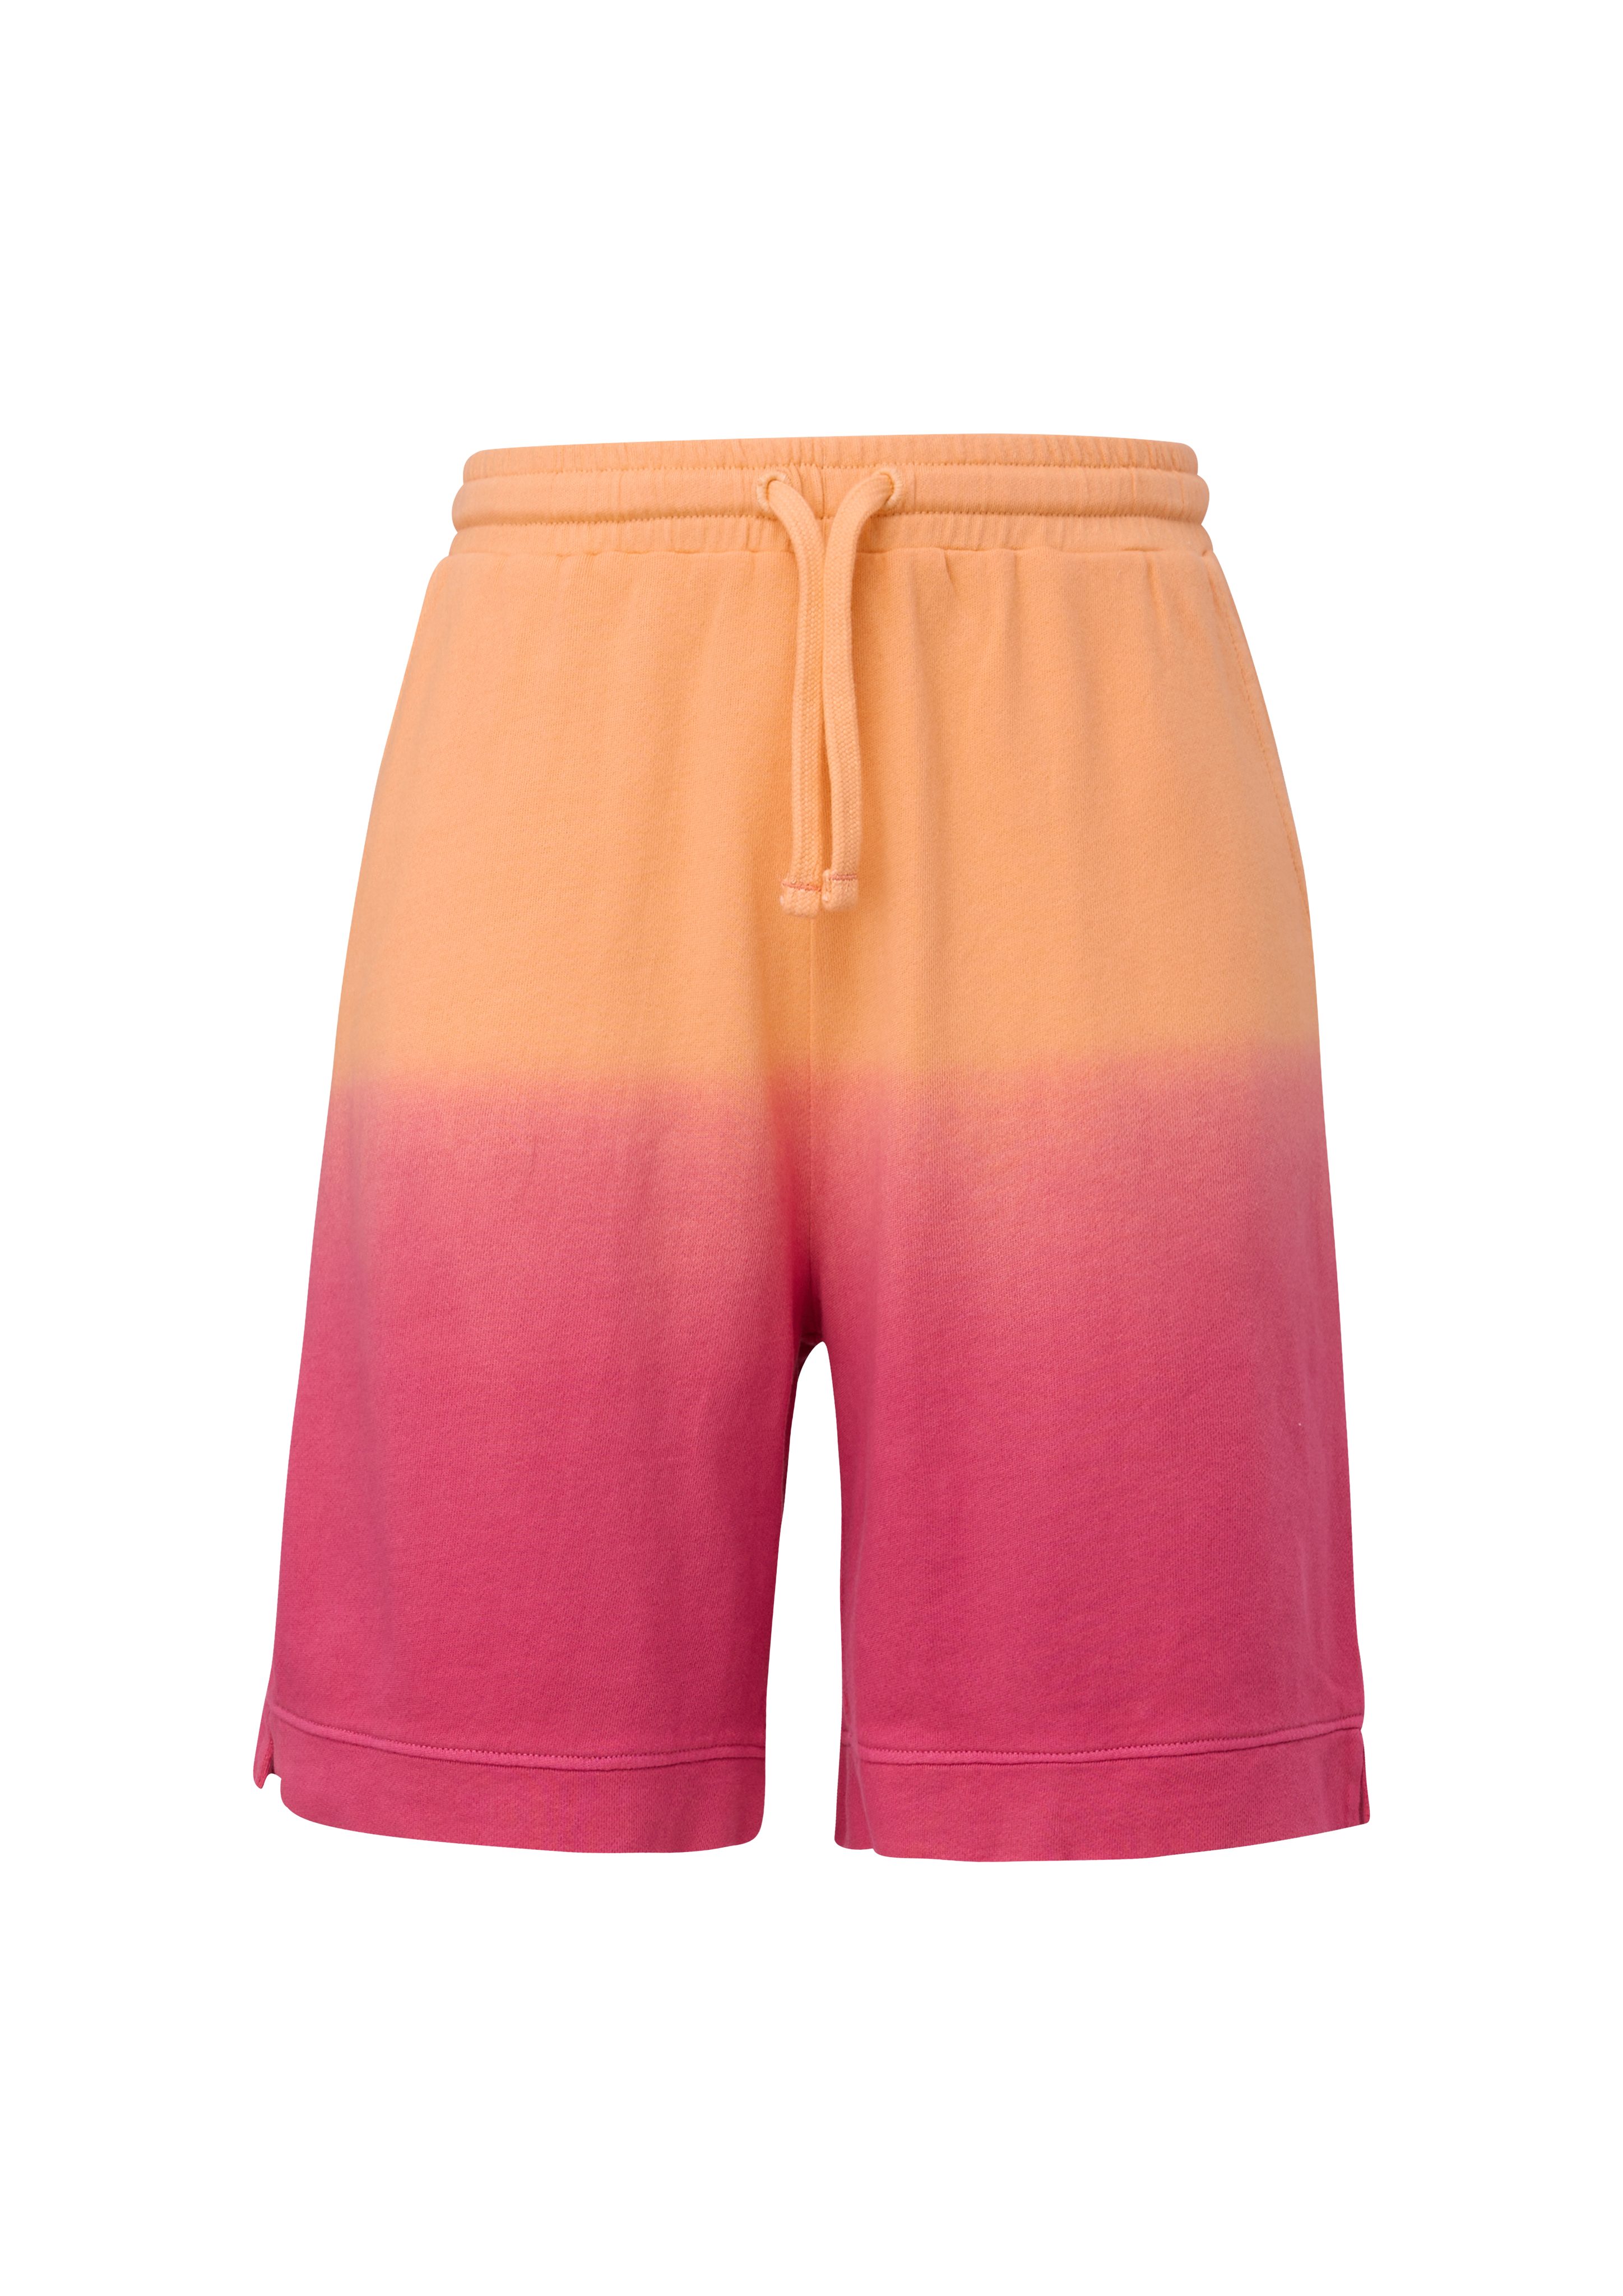 mit Sweatshorts s.Oliver Smiley®-Print Relaxed: Shorts pink